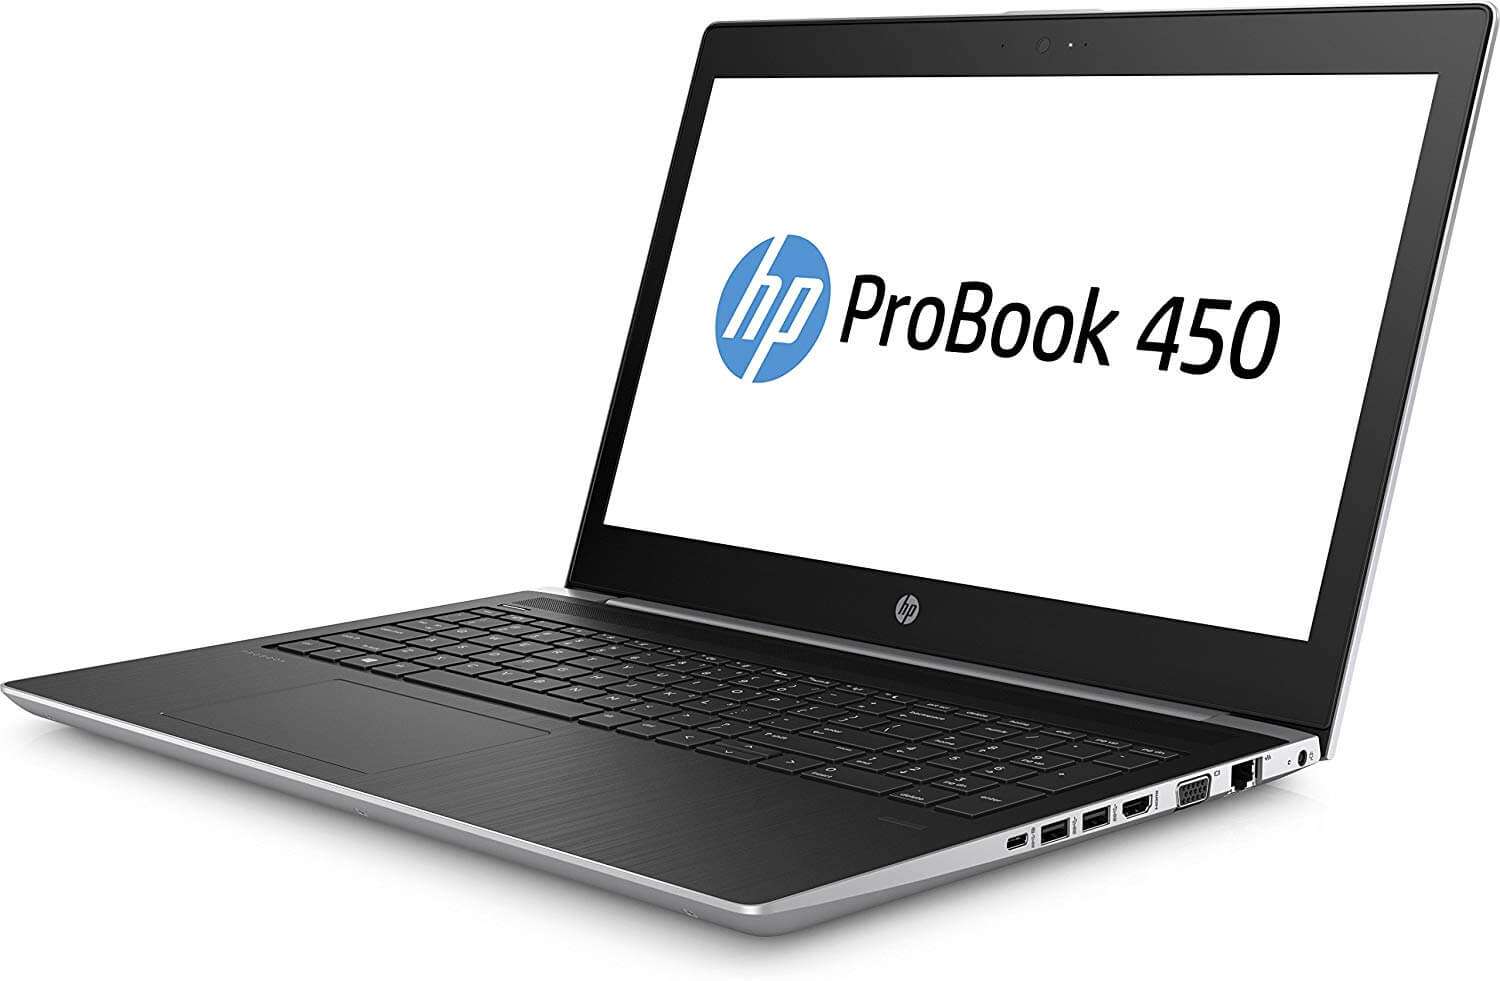 hp ProBook 450G5 Notebook With 15.6-Inch Display, Core i5 Processor/4GB